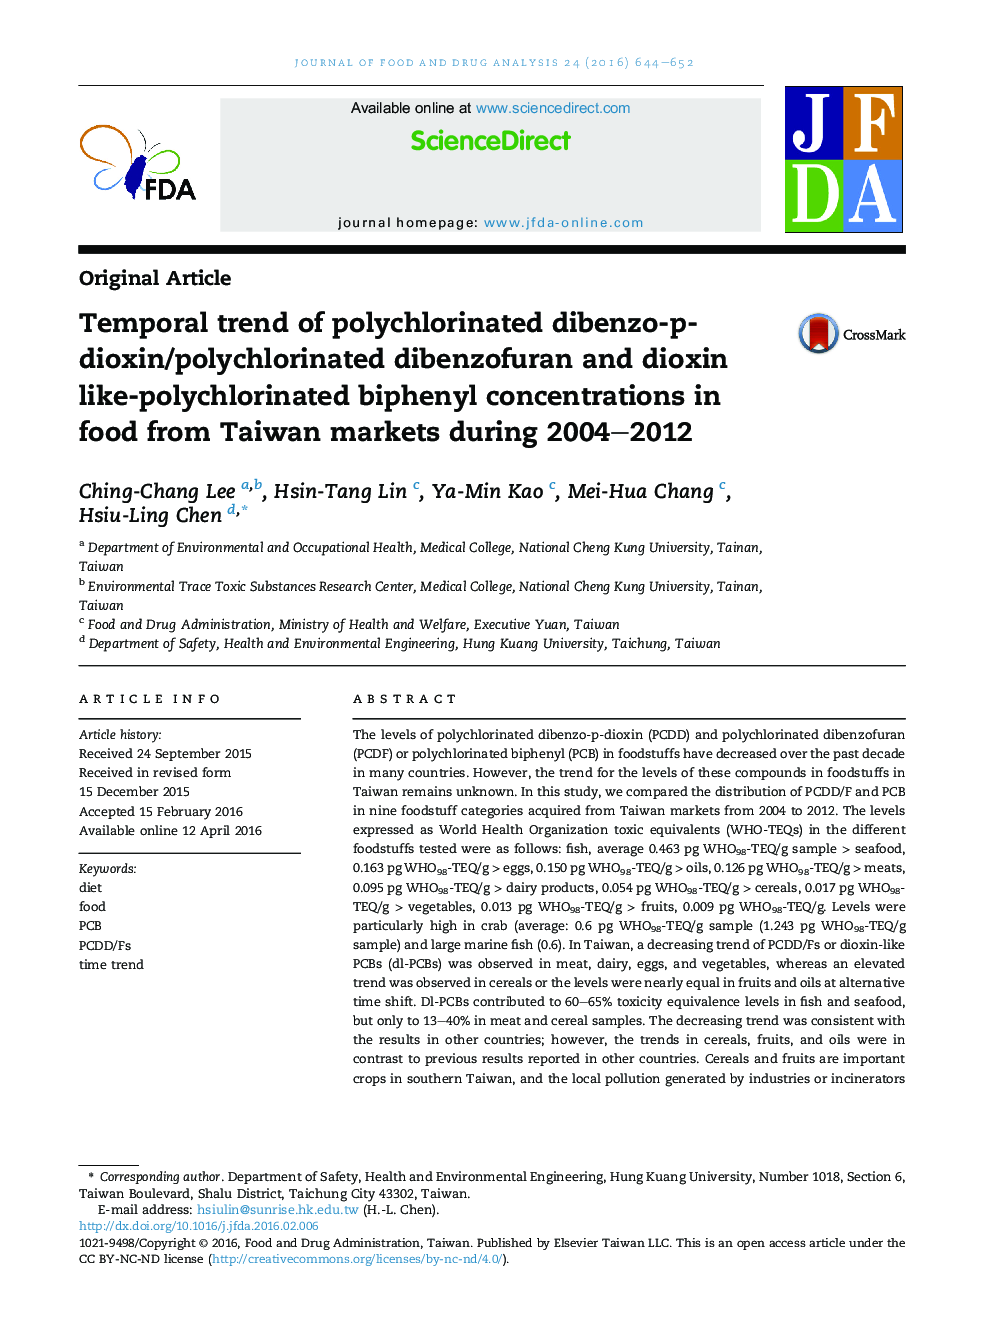 Temporal trend of polychlorinated dibenzo-p-dioxin/polychlorinated dibenzofuran and dioxin like-polychlorinated biphenyl concentrations in food from Taiwan markets during 2004–2012